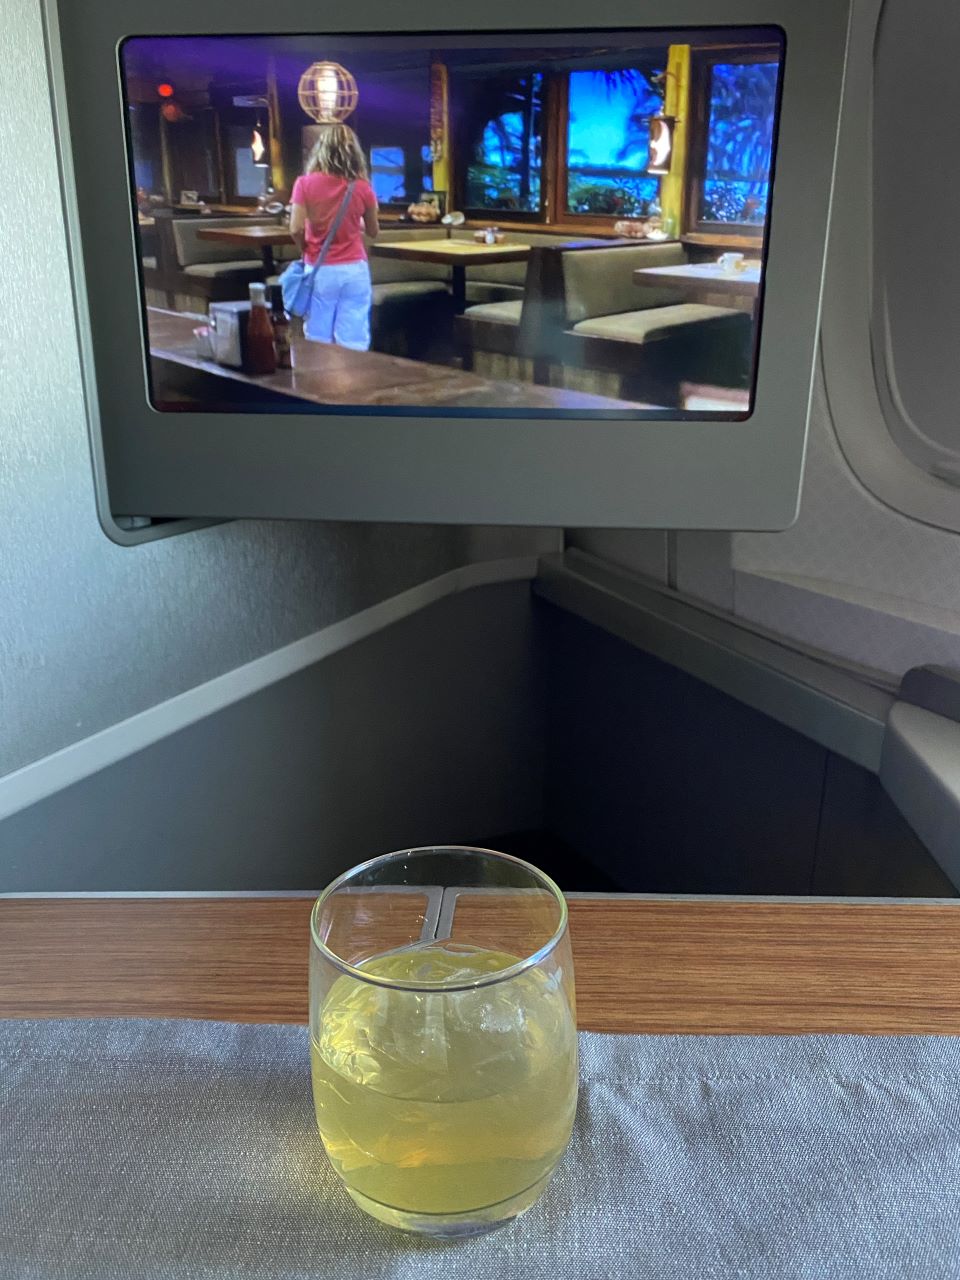 American Airlines business class IFE screen while drinking champagne